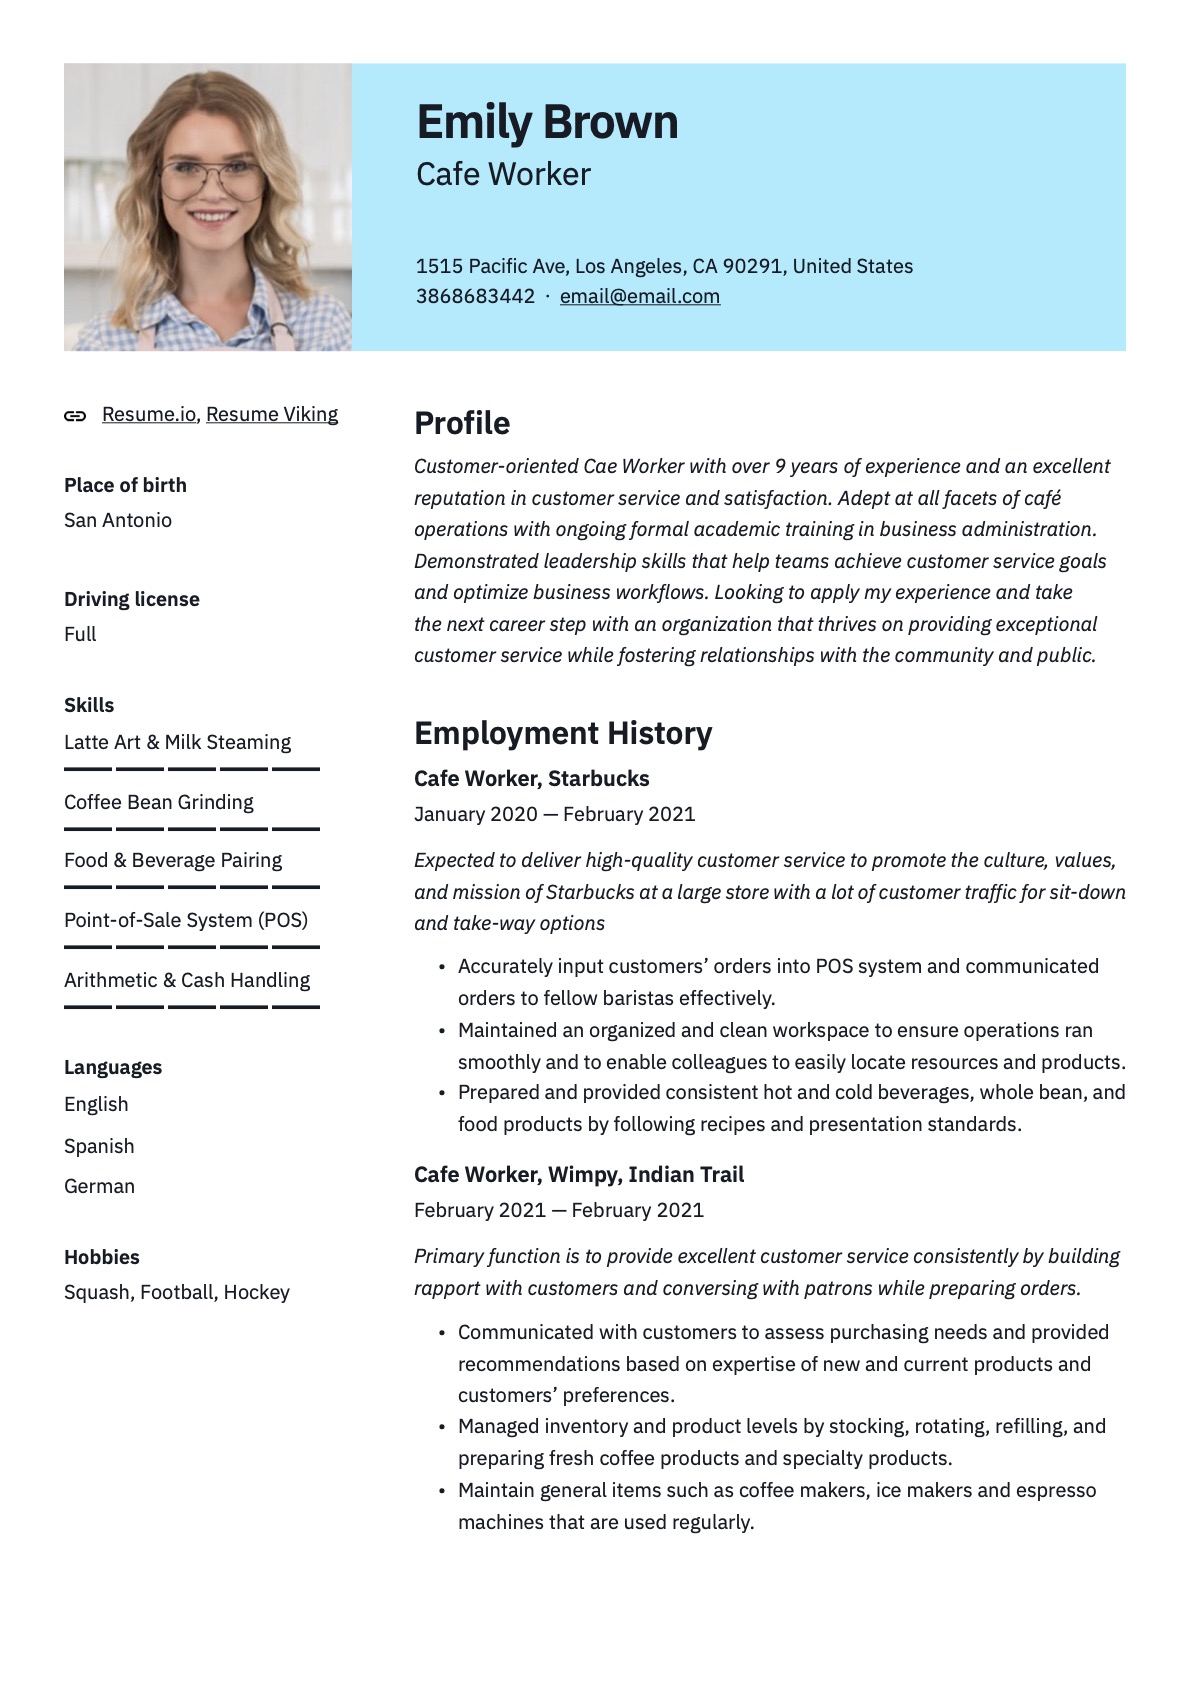 Example Resume Cafe Worker-3